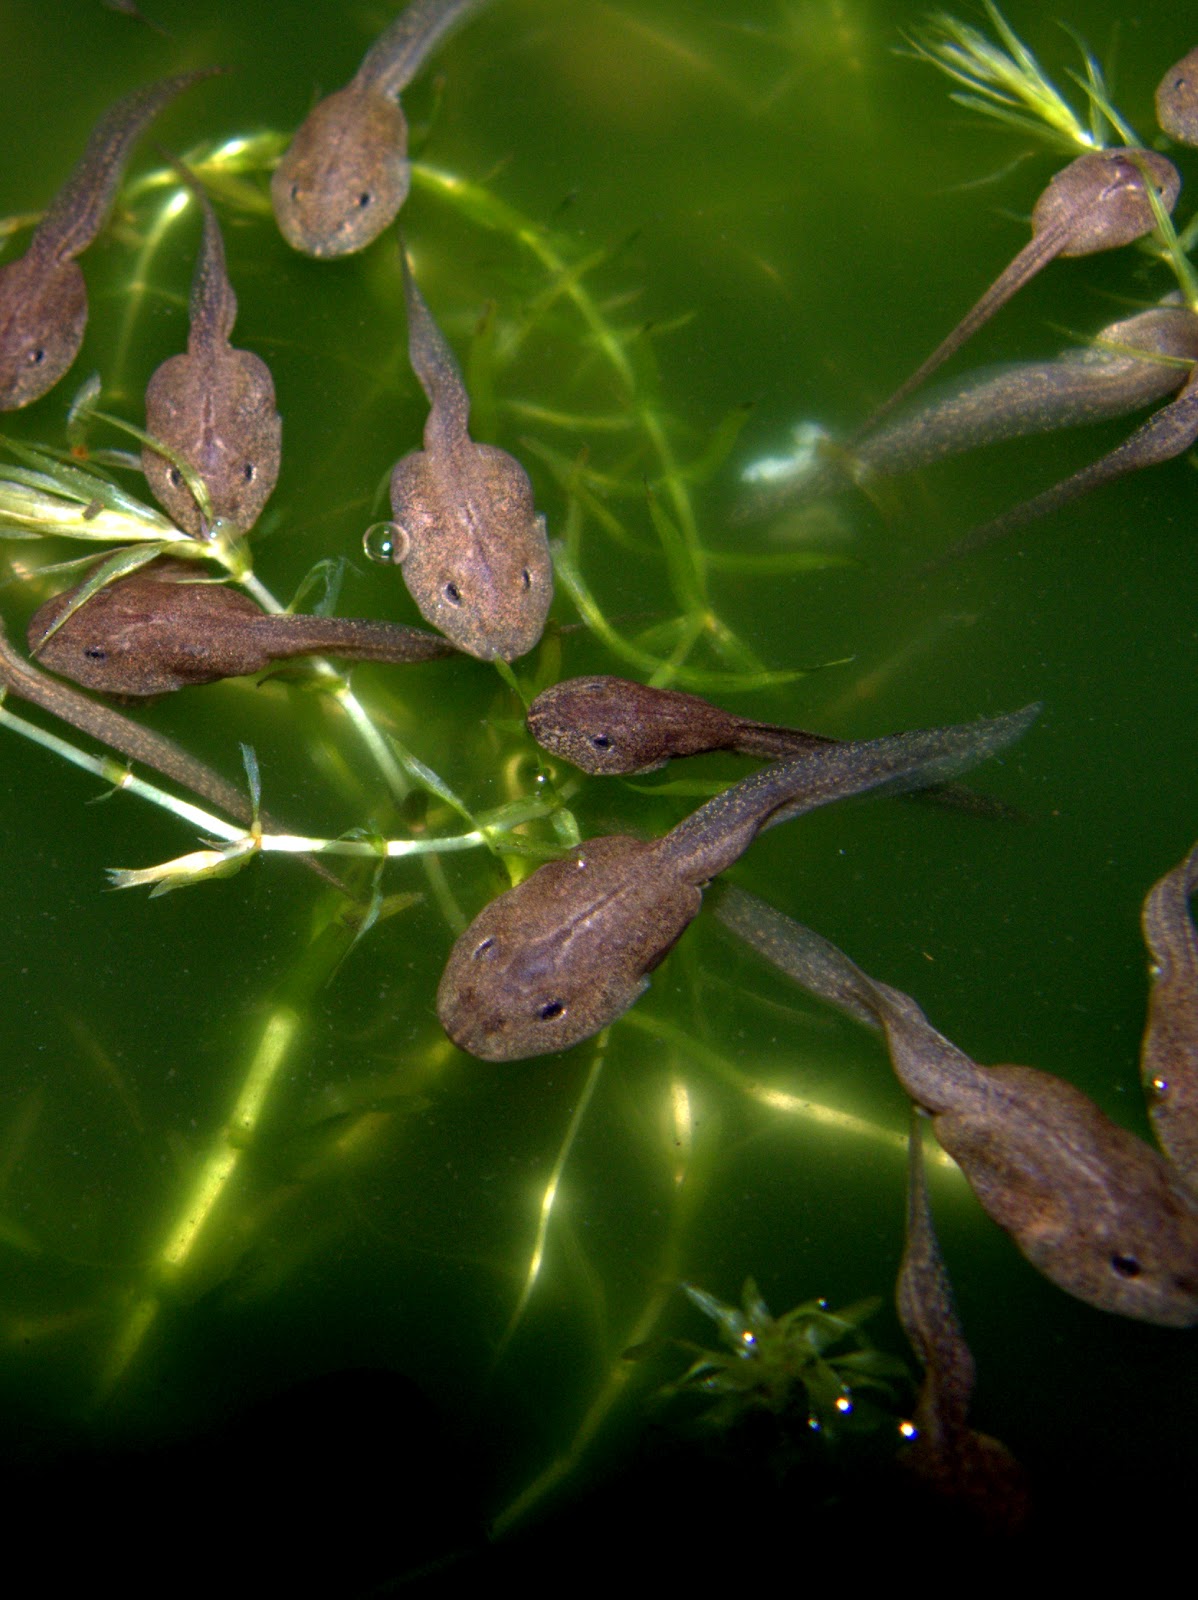 Peter Lovett's ramblings : The most pampered tadpoles in Sussex?